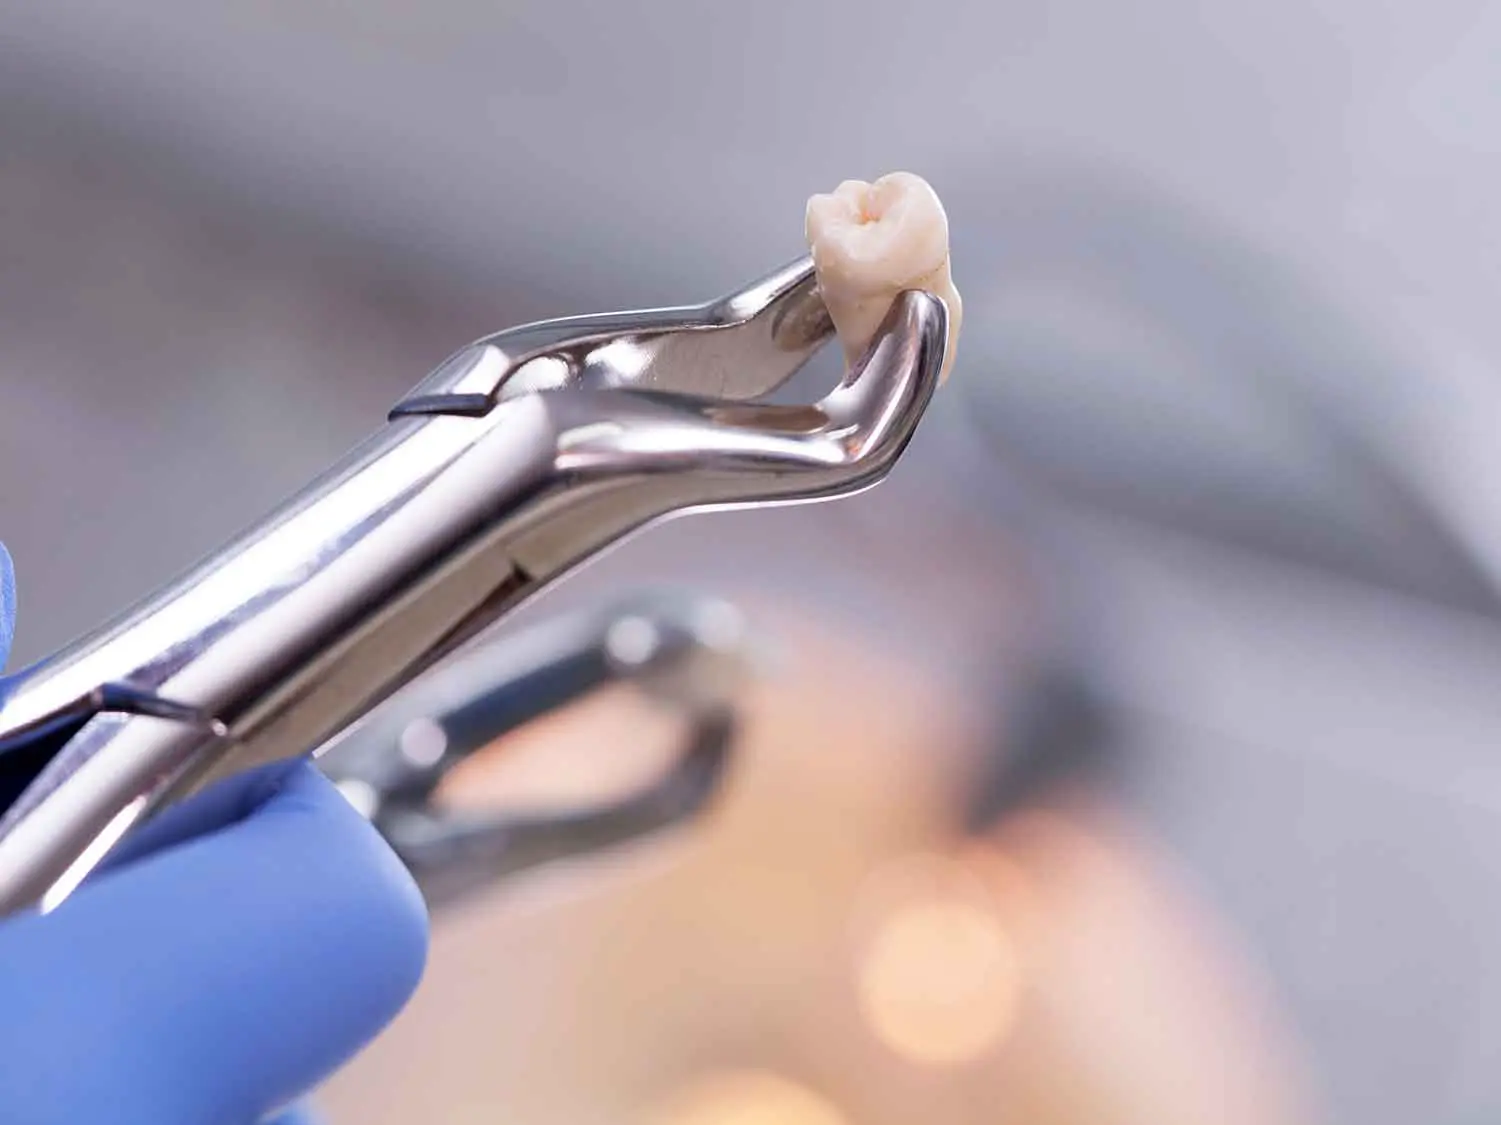 tooth-extraction-blurred-background